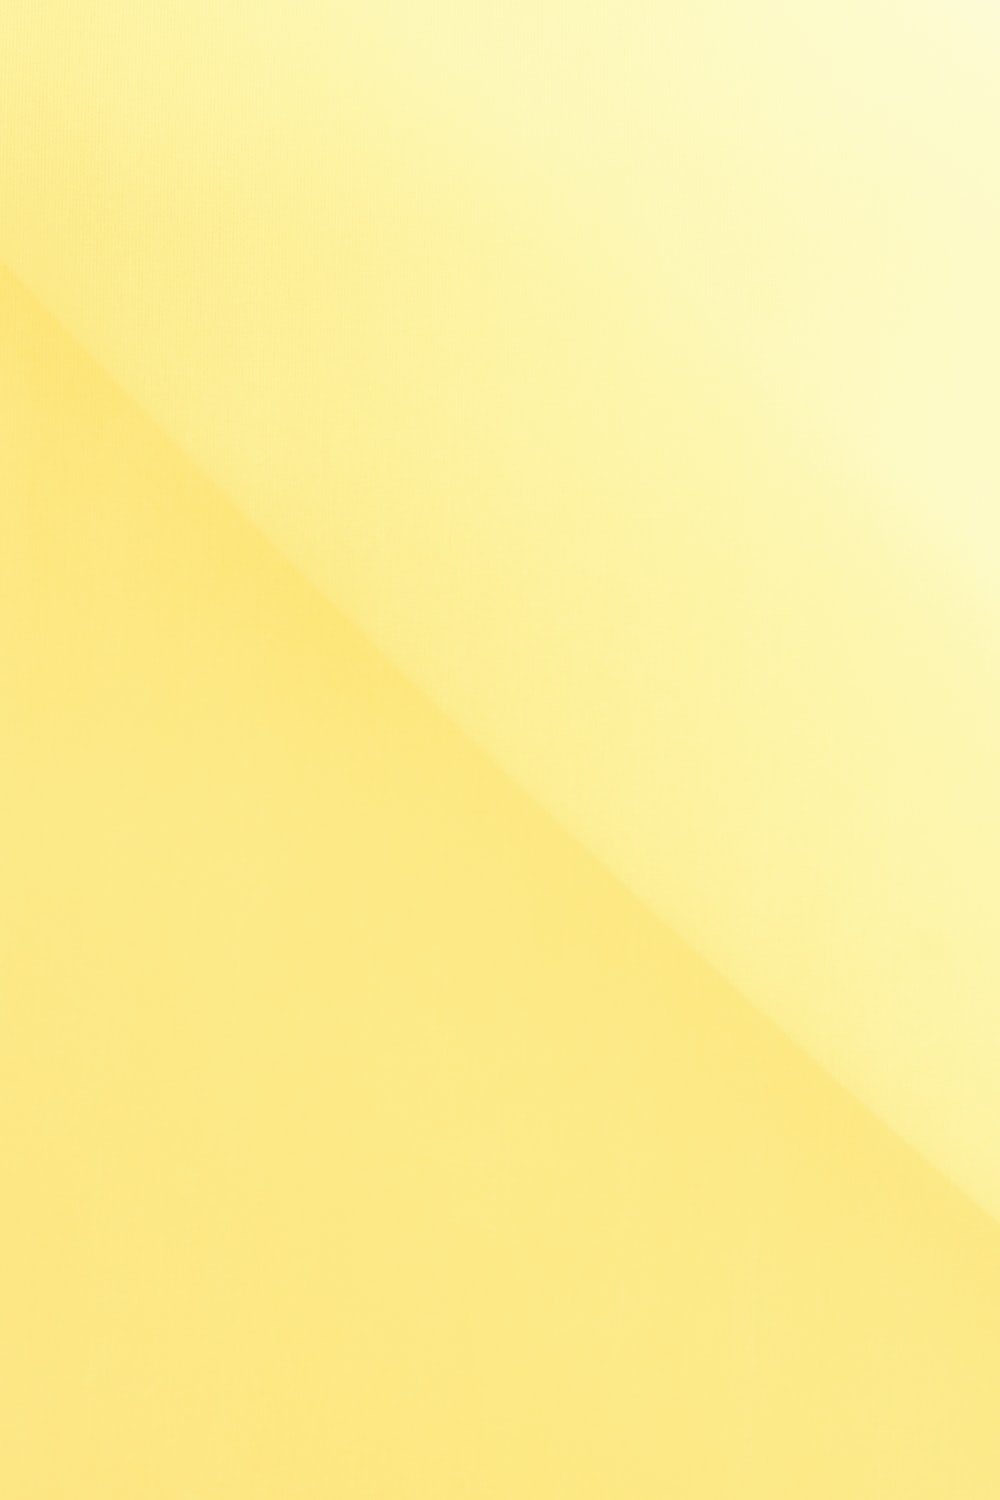 Yellow Texture Picture. Download Free Image